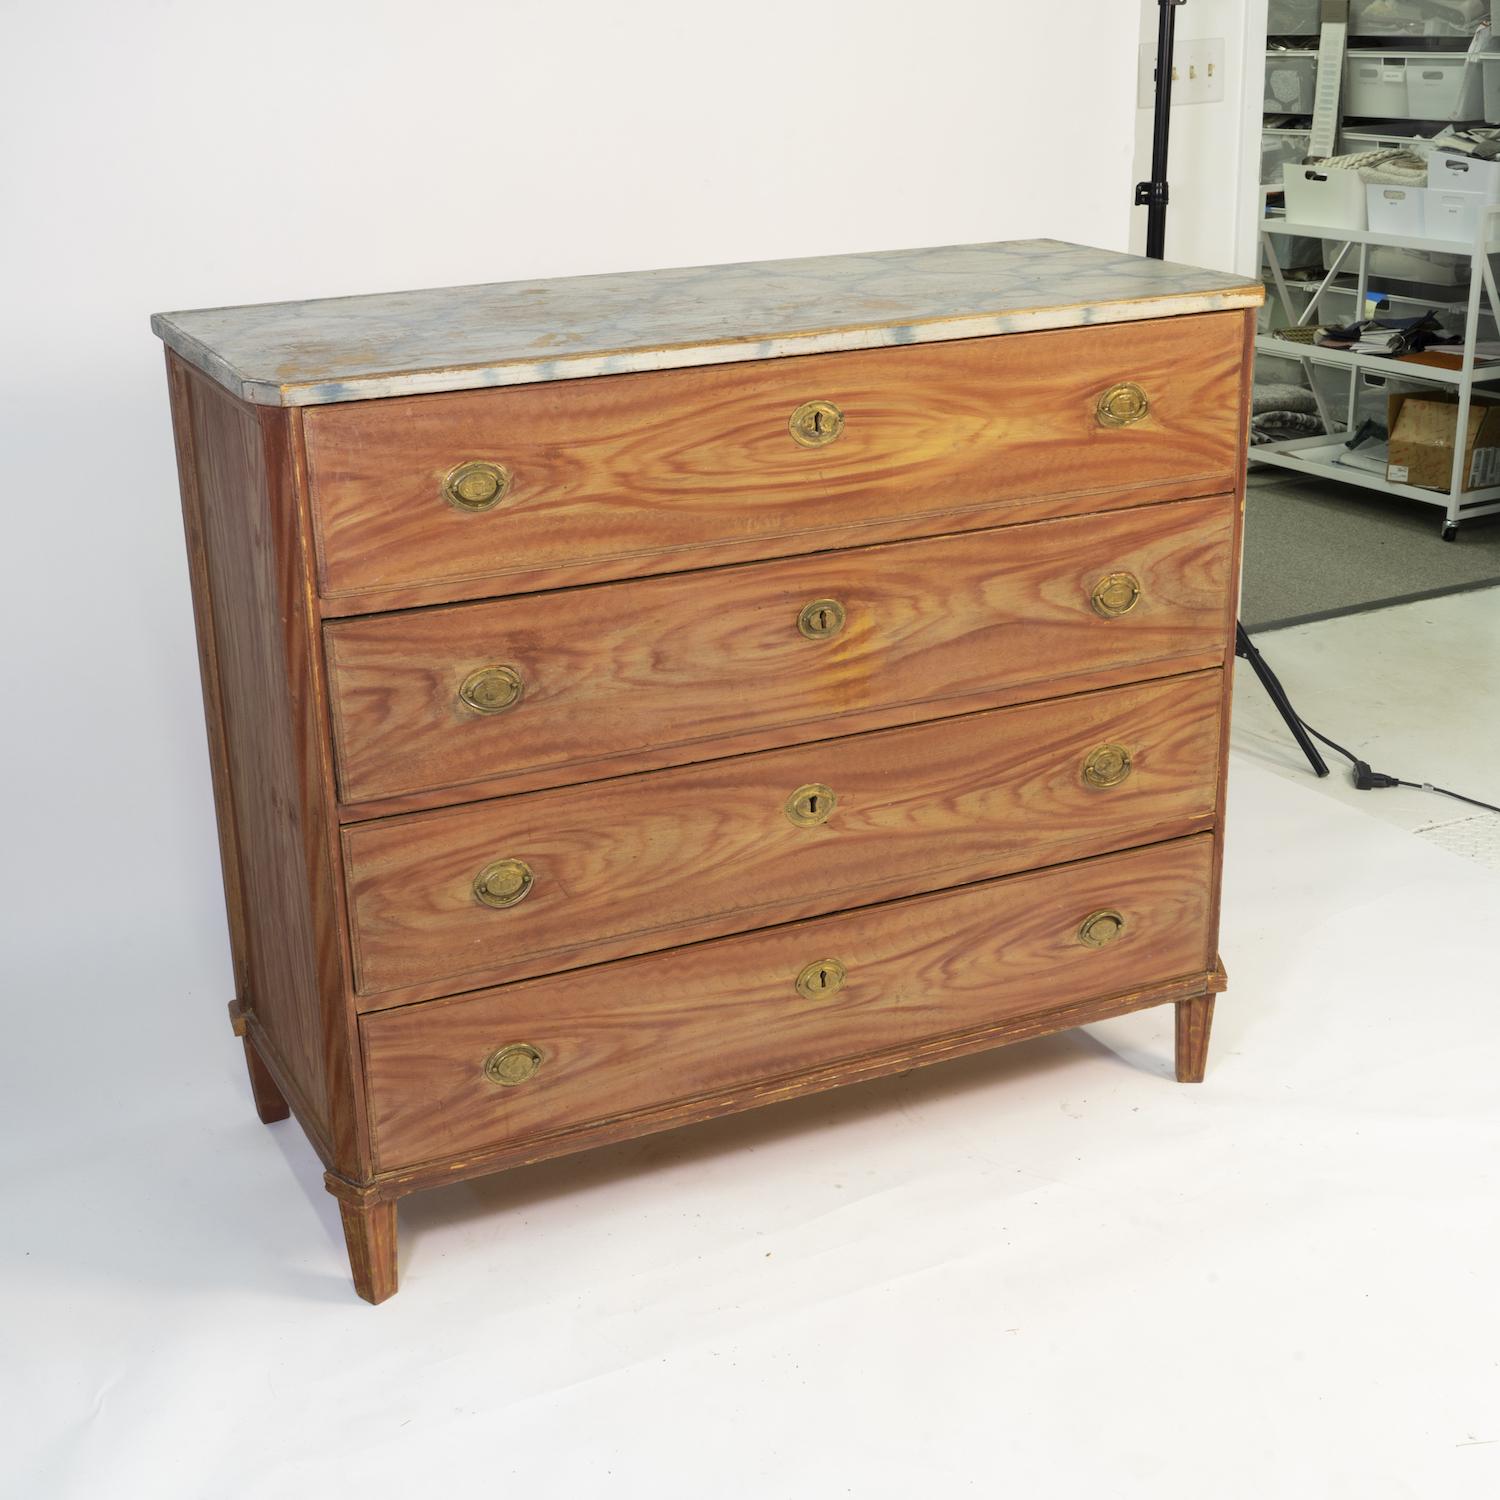 Swedish chest of drawers with hand painted faux bois and faux marble. Top drawer has a built in secretary desk.